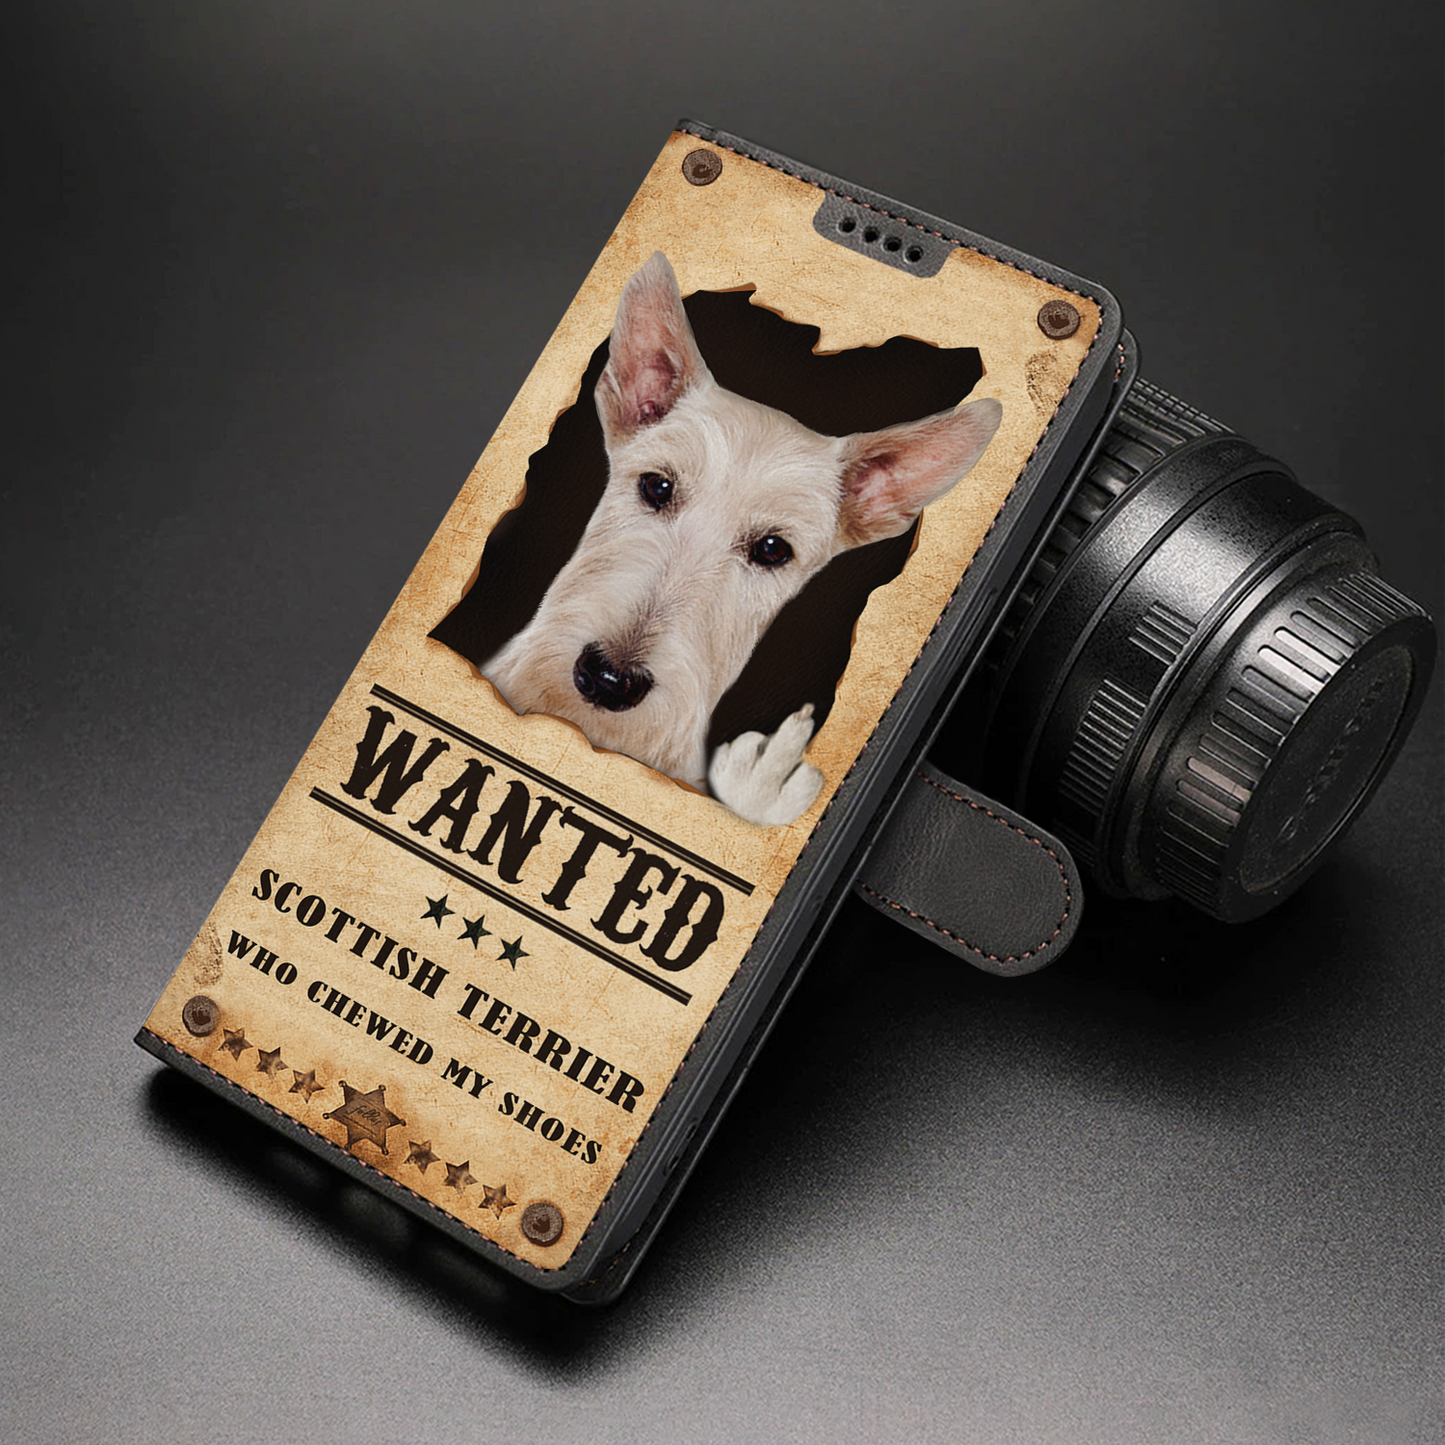 Scottish Terrier Wanted - Fun Wallet Phone Case V1